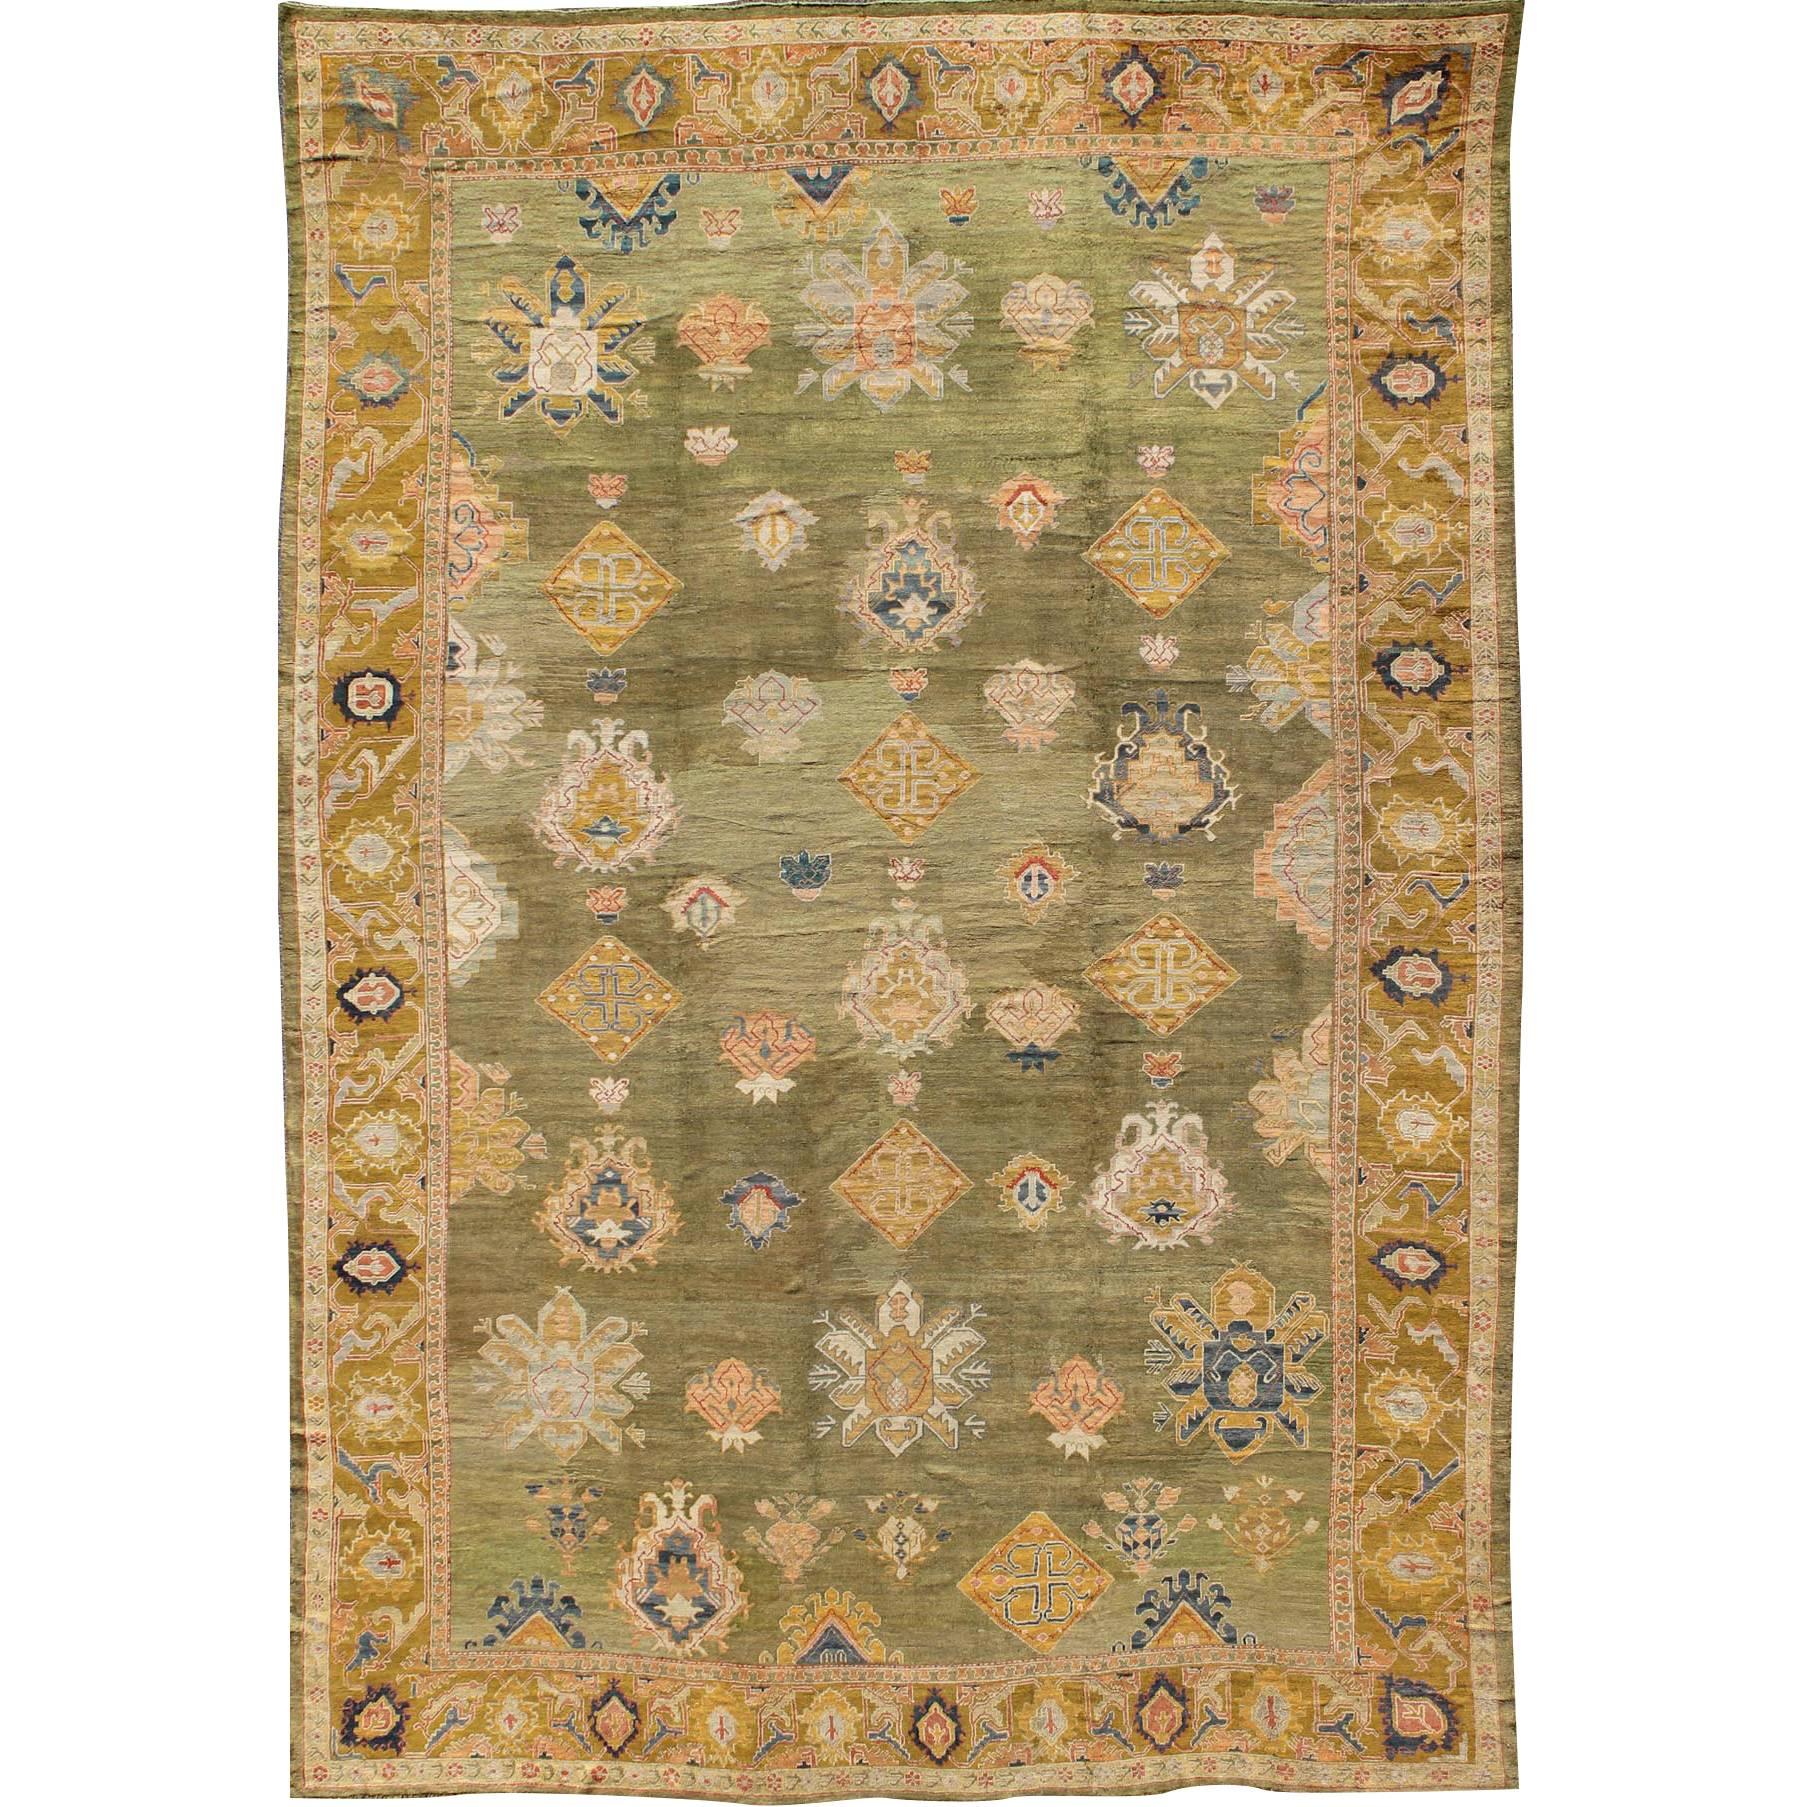 Outstanding Palace Size Antique Oushak Rug